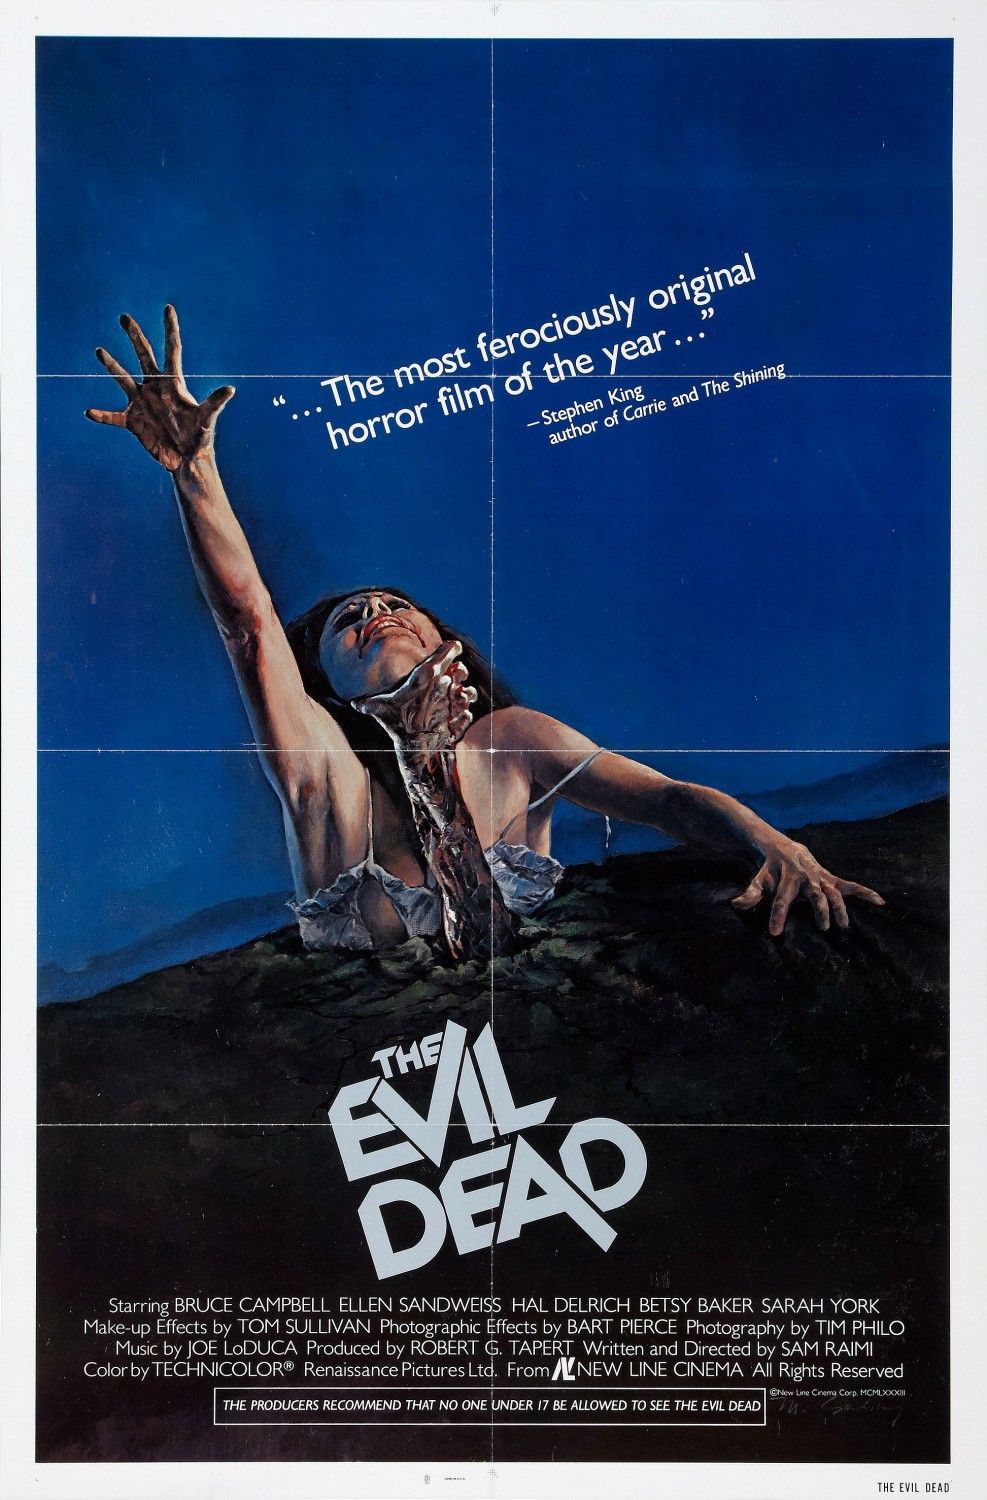 THE EVIL DEAD [1981]